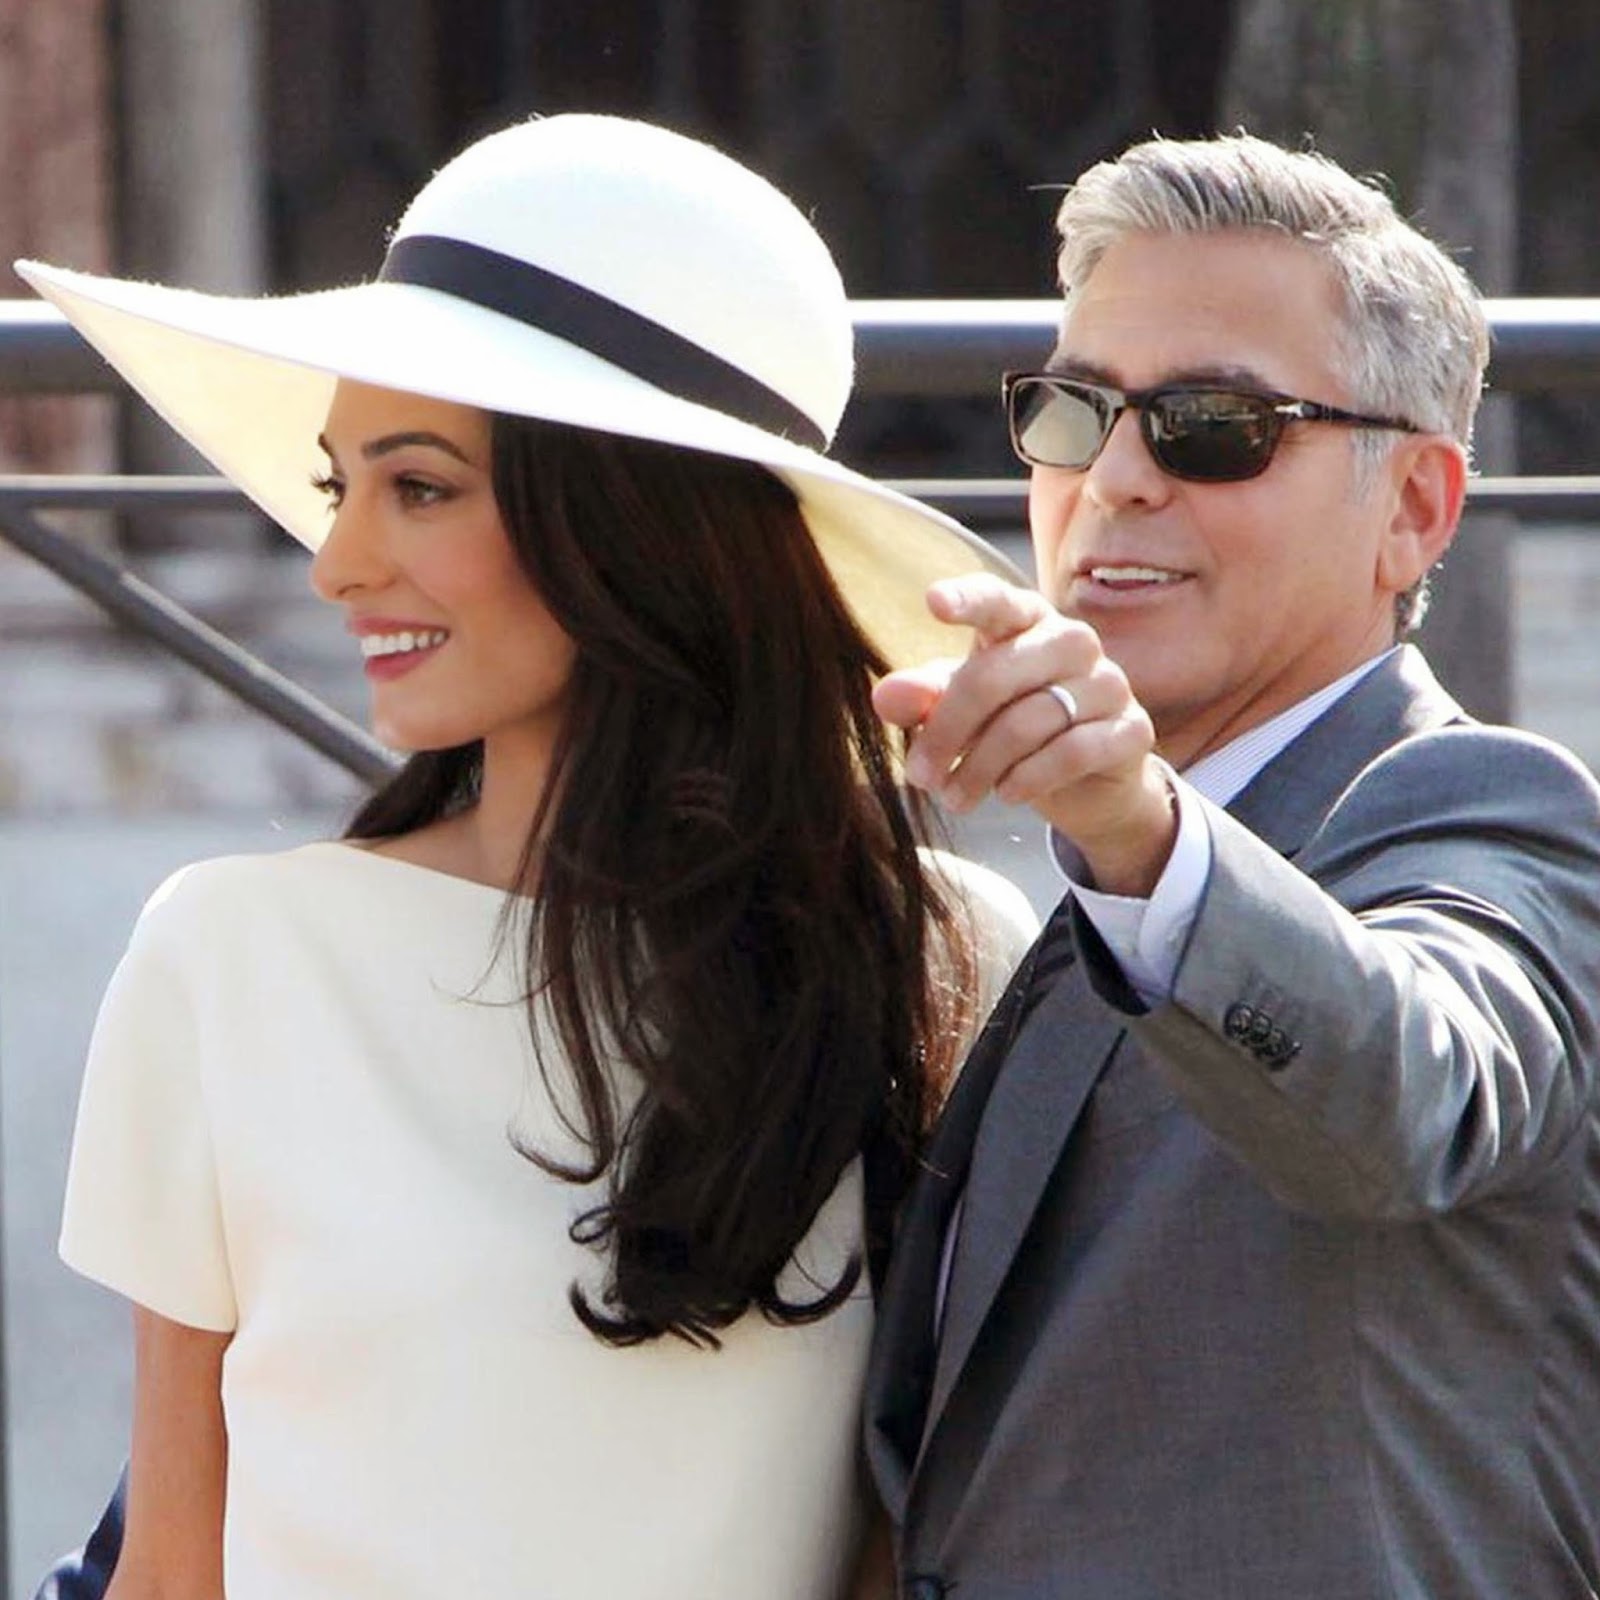 Hollywood Actor Clooney and Amal Alamuddin's